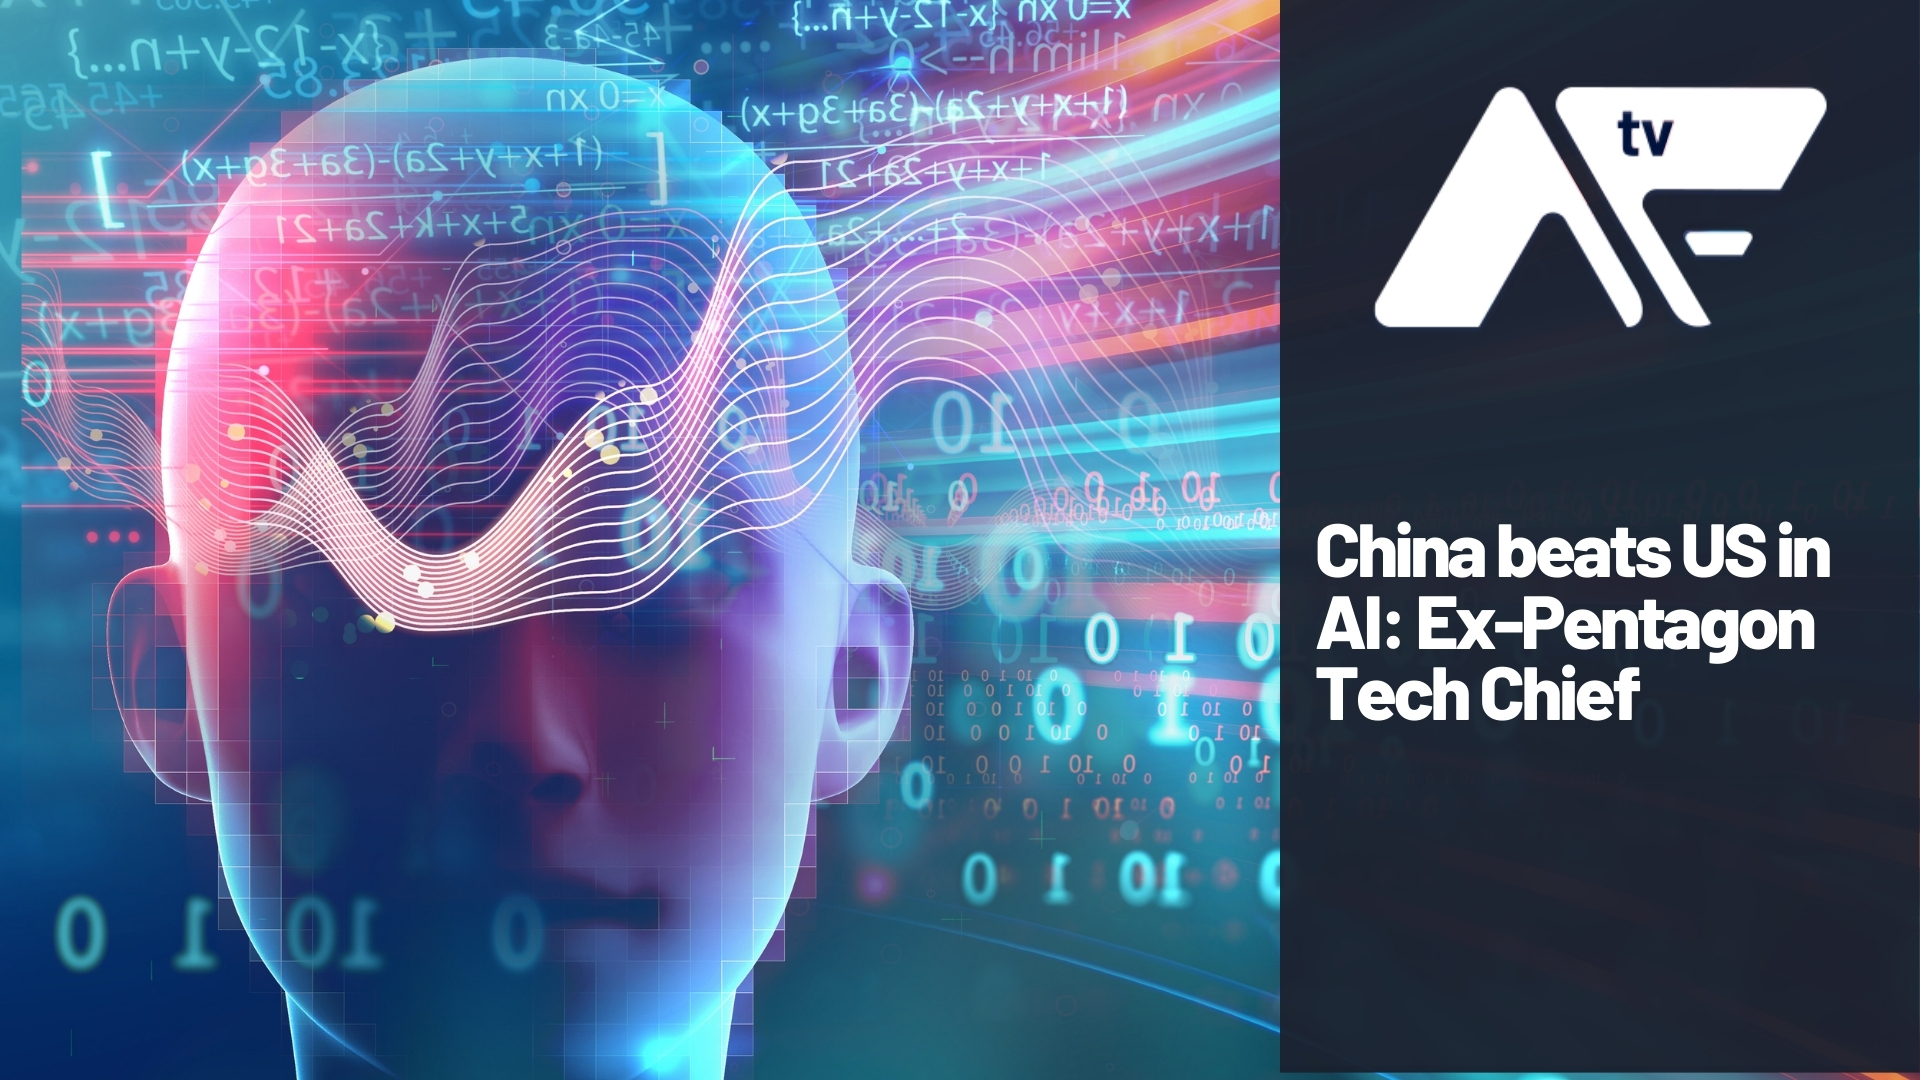 AF TV – China beats US in AI: Ex-Pentagon Tech Chief